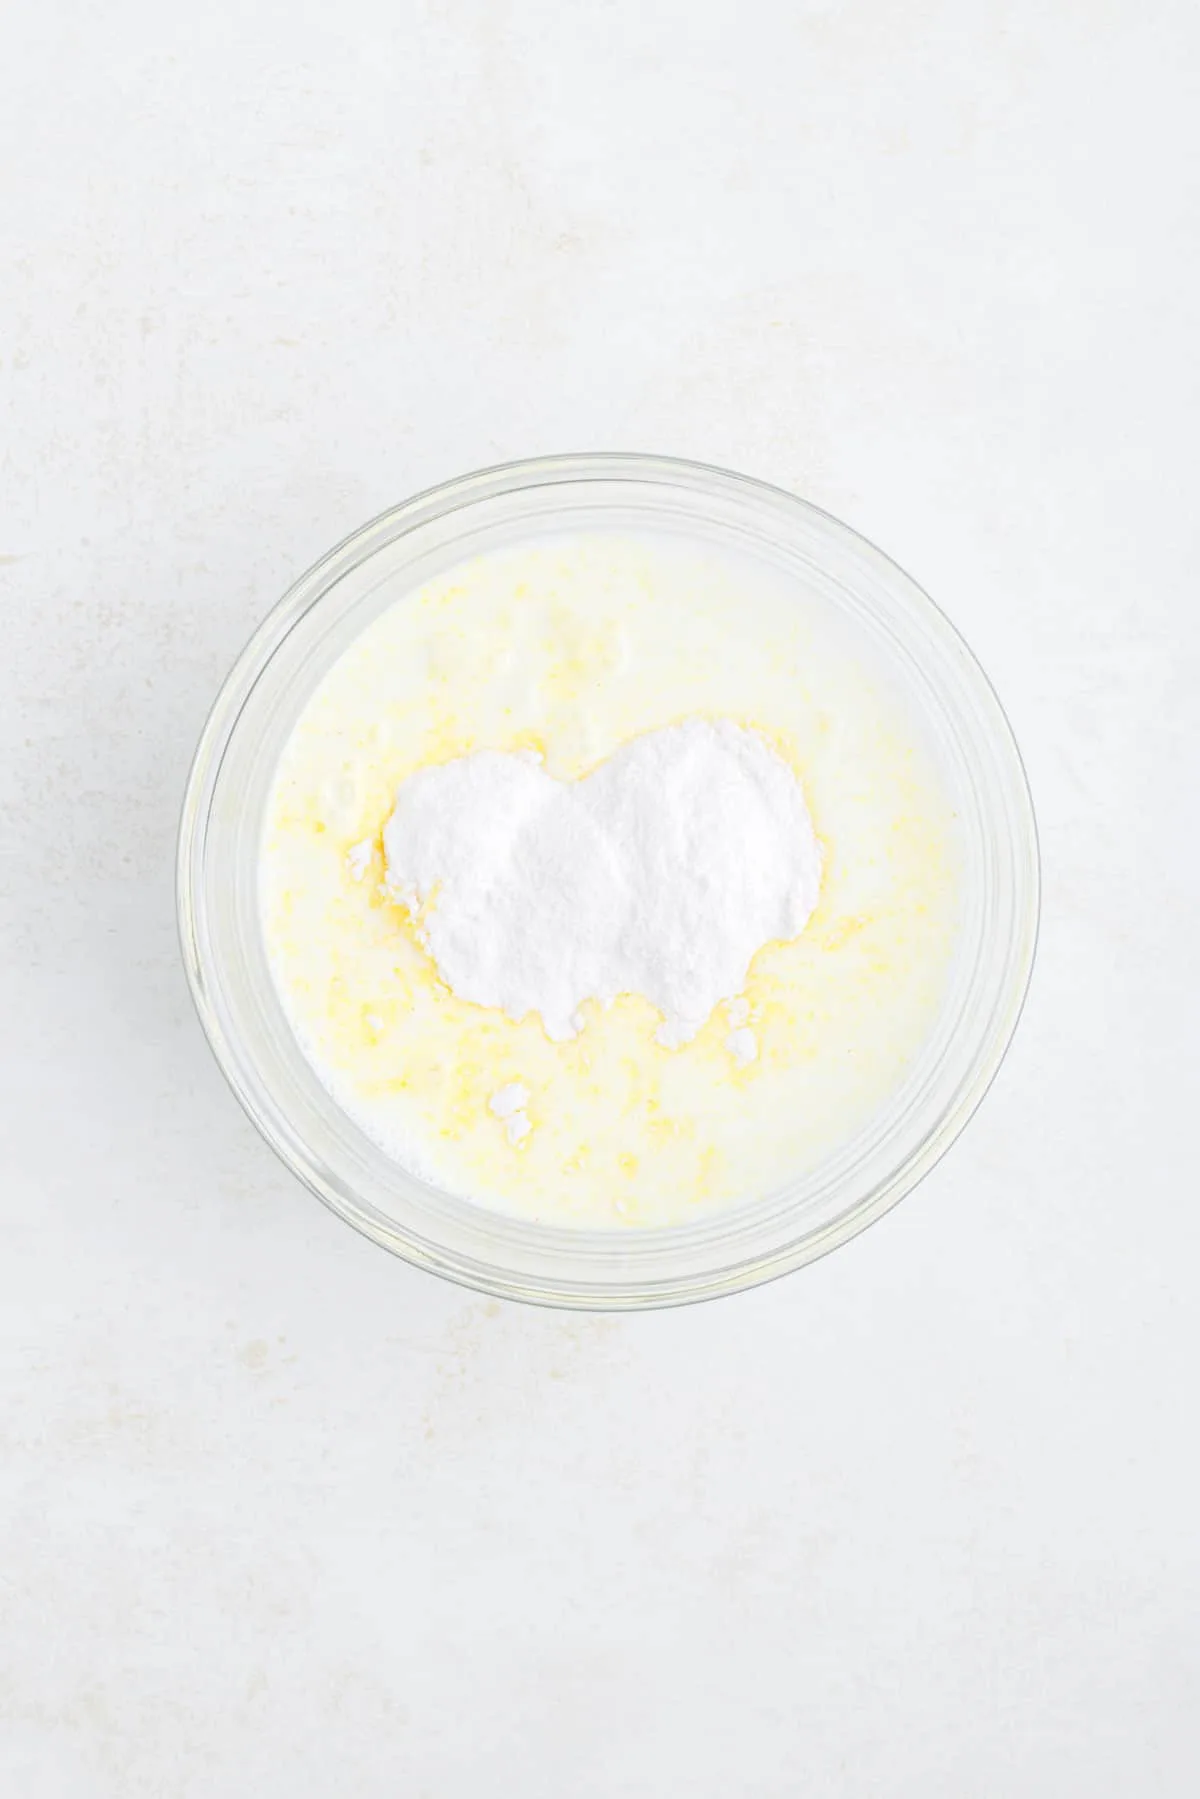 milk and instant lemon pudding mix in a bowl